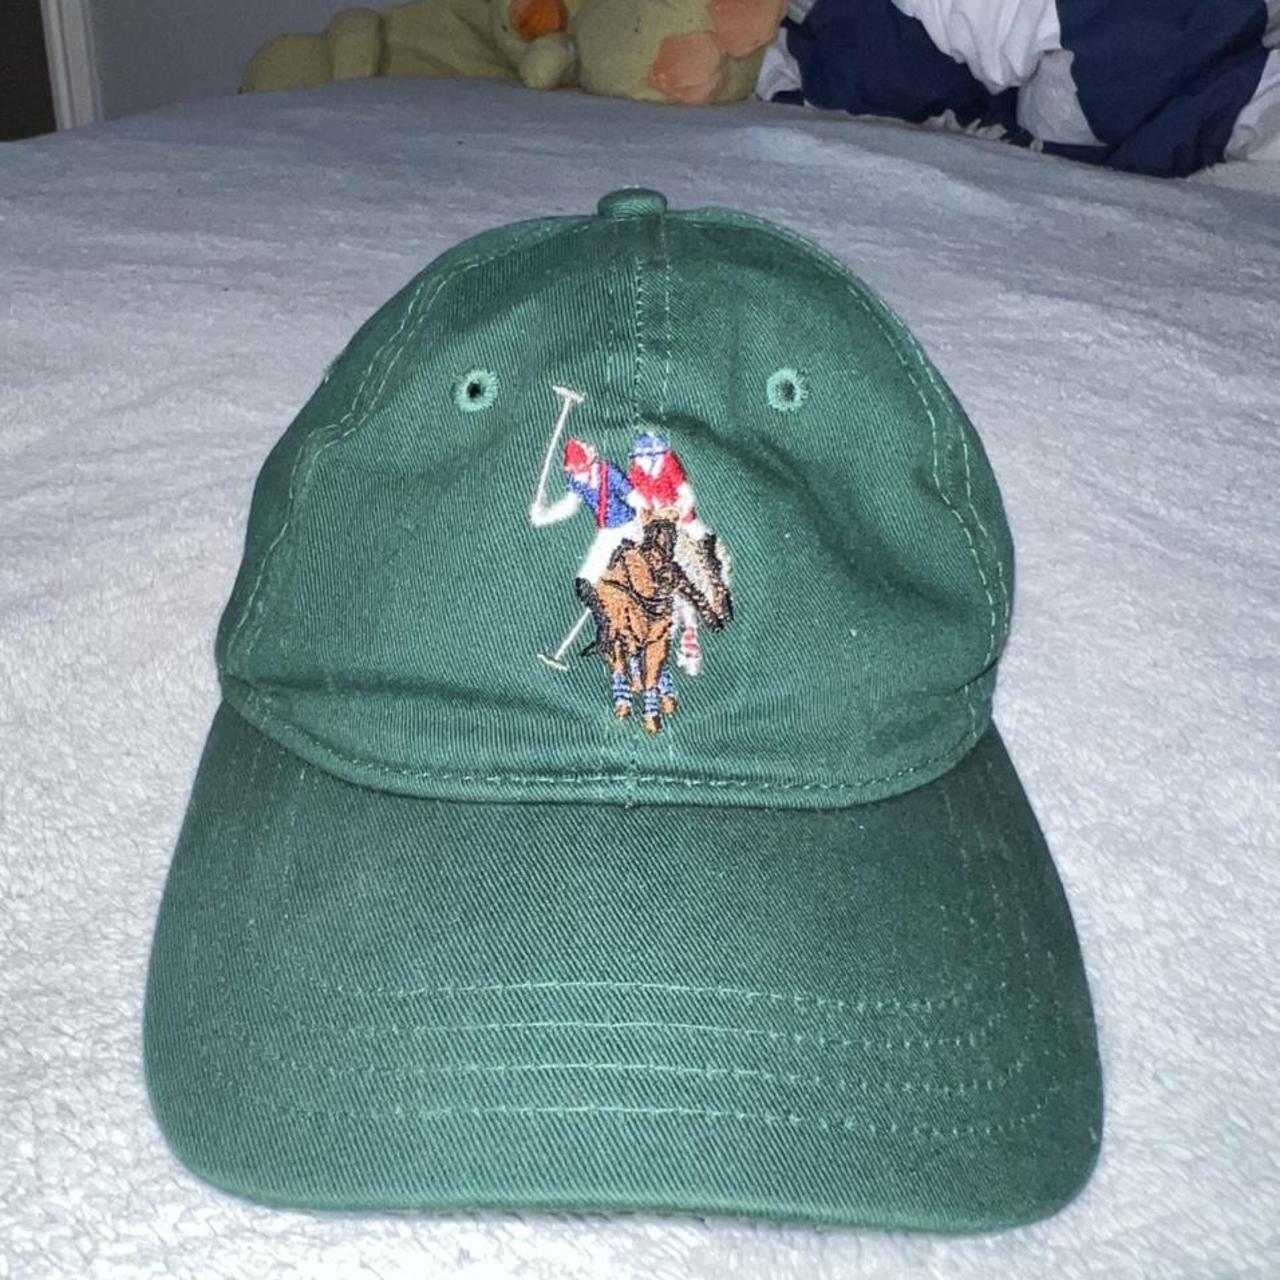 U.S. Polo Assn. Men's Green and Red Hat